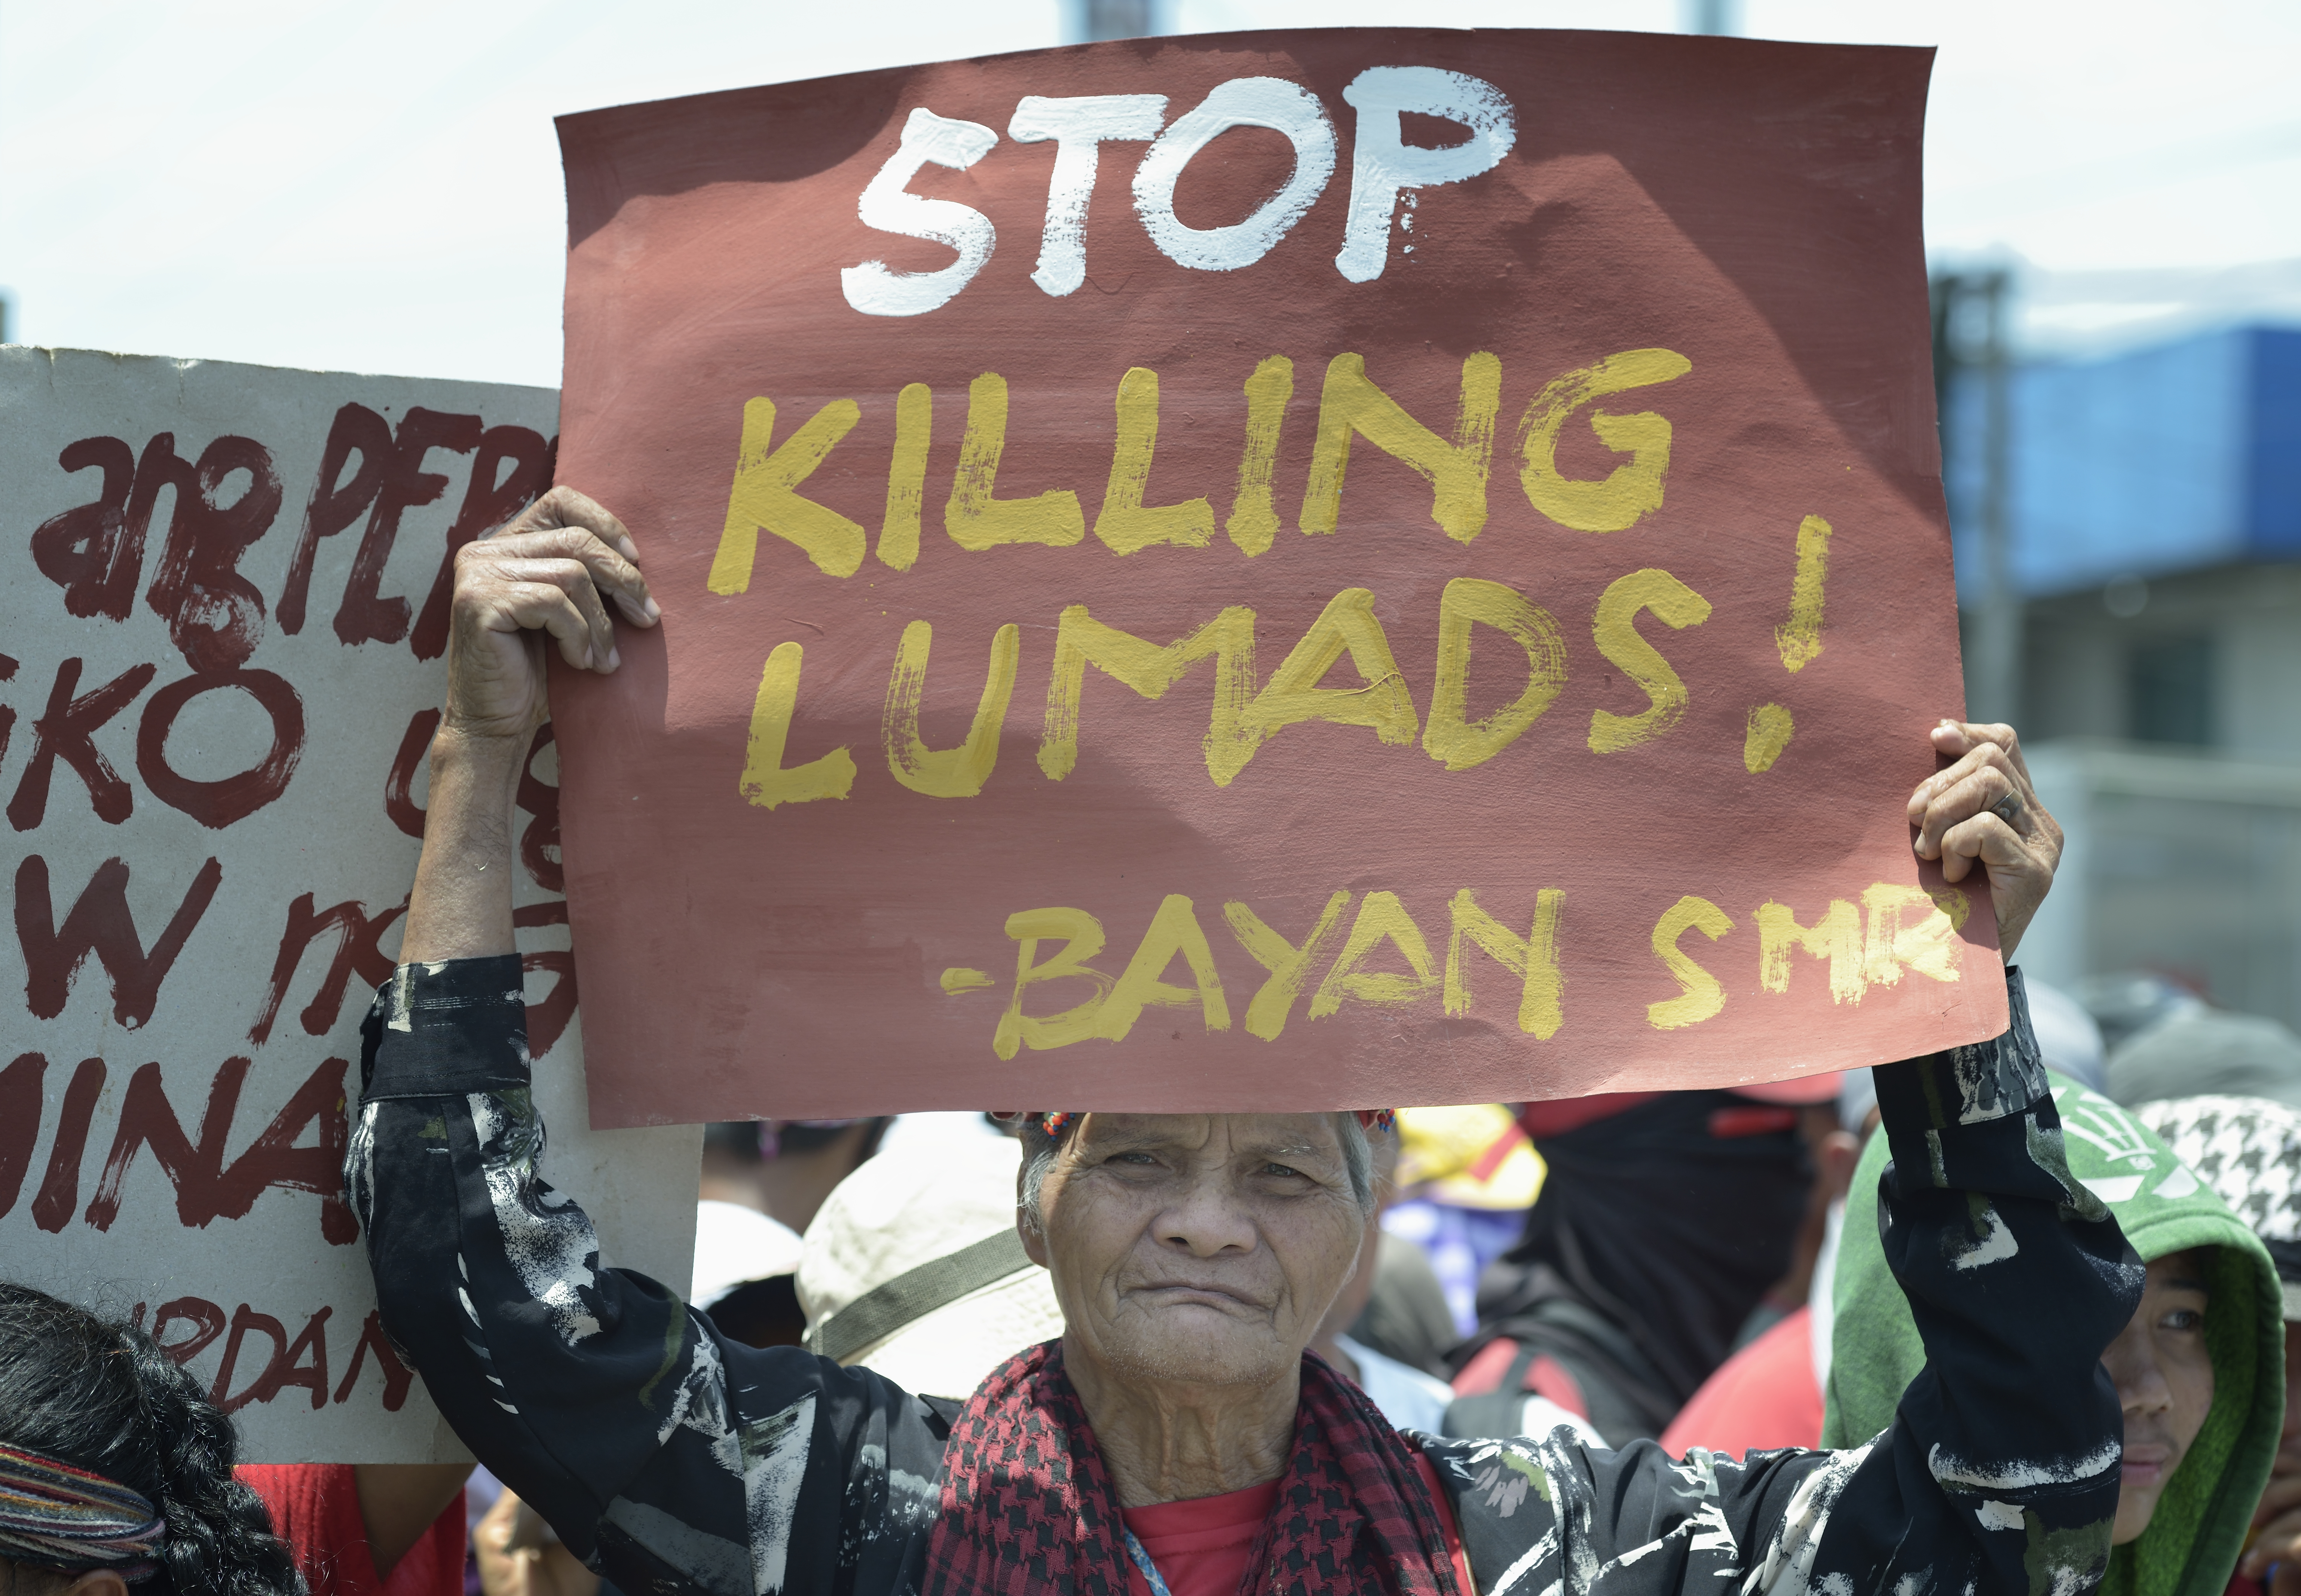 An Indigenous man holds a sign during a demonstration in 2016 outside a military base in Davao, on the southern Philippine island of Mindanao. Hundreds of Indigenous (known locally as Lumads) were living in a church compound in the city, chased out of their rural villages by paramilitary squads. Photo © Paul Jeffrey, Life on Earth Pictures